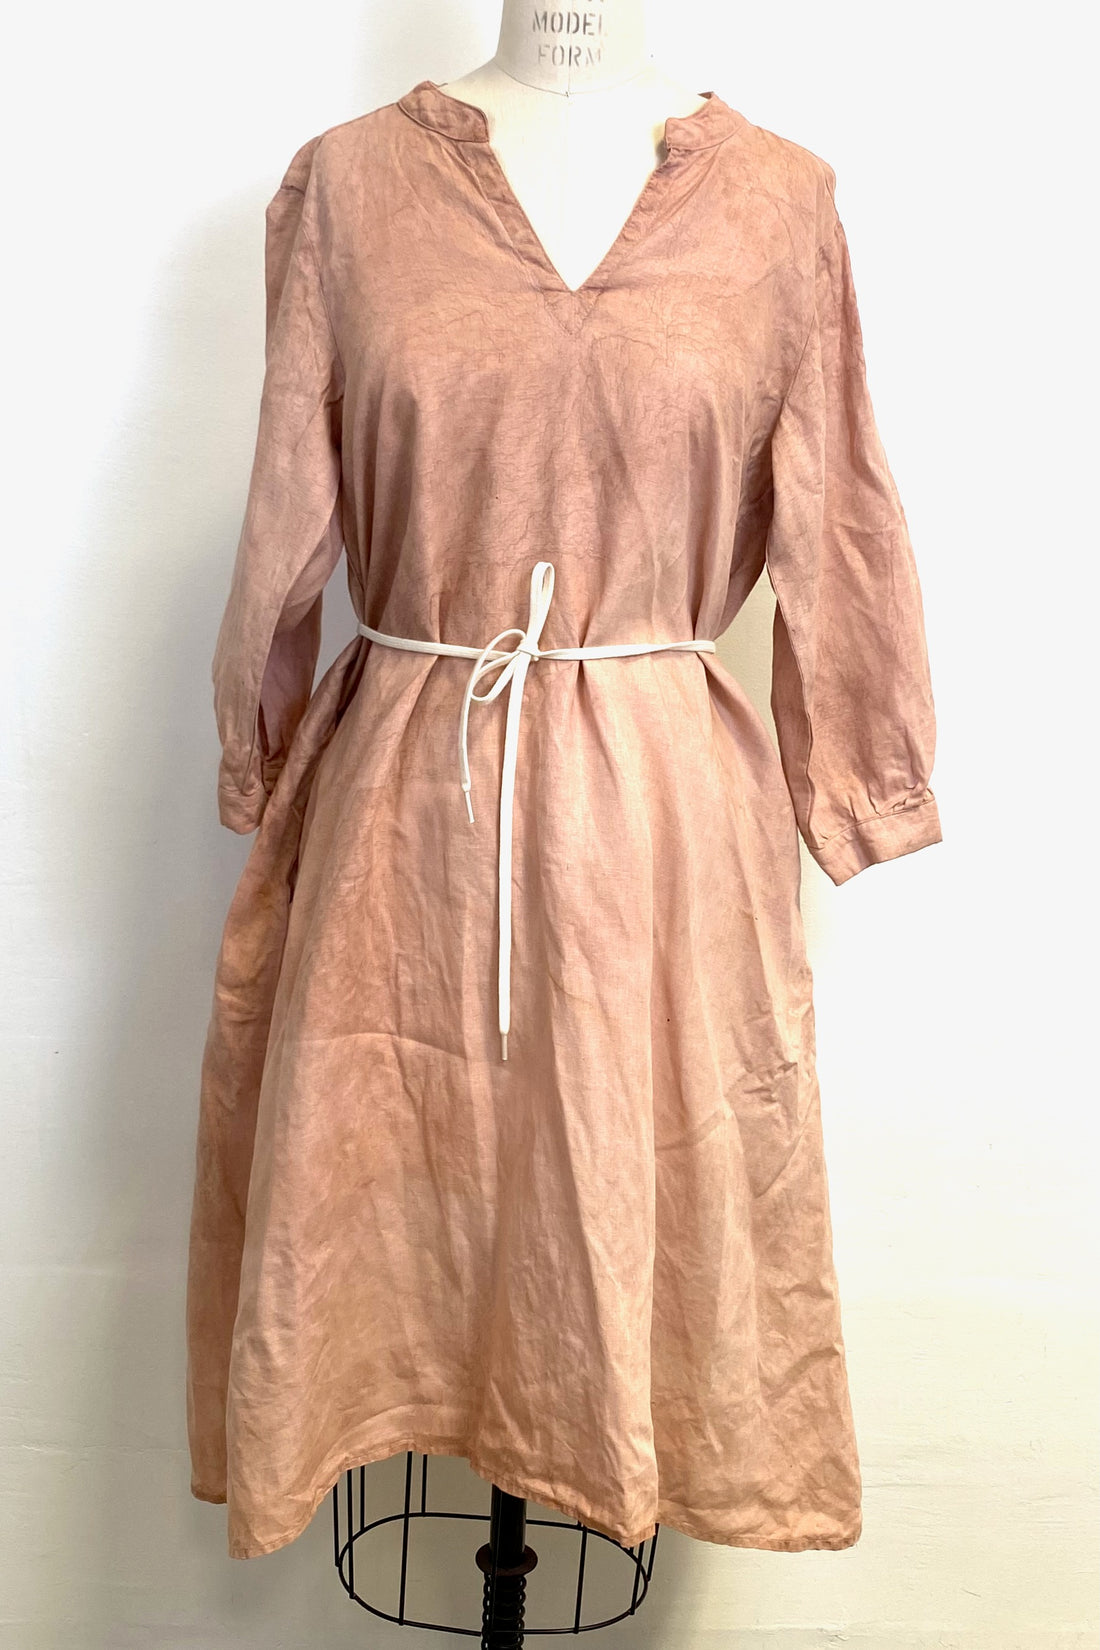 Peach Organic Linen Celeste Dress with Pockets - The Perfect Dress for Every Occasion